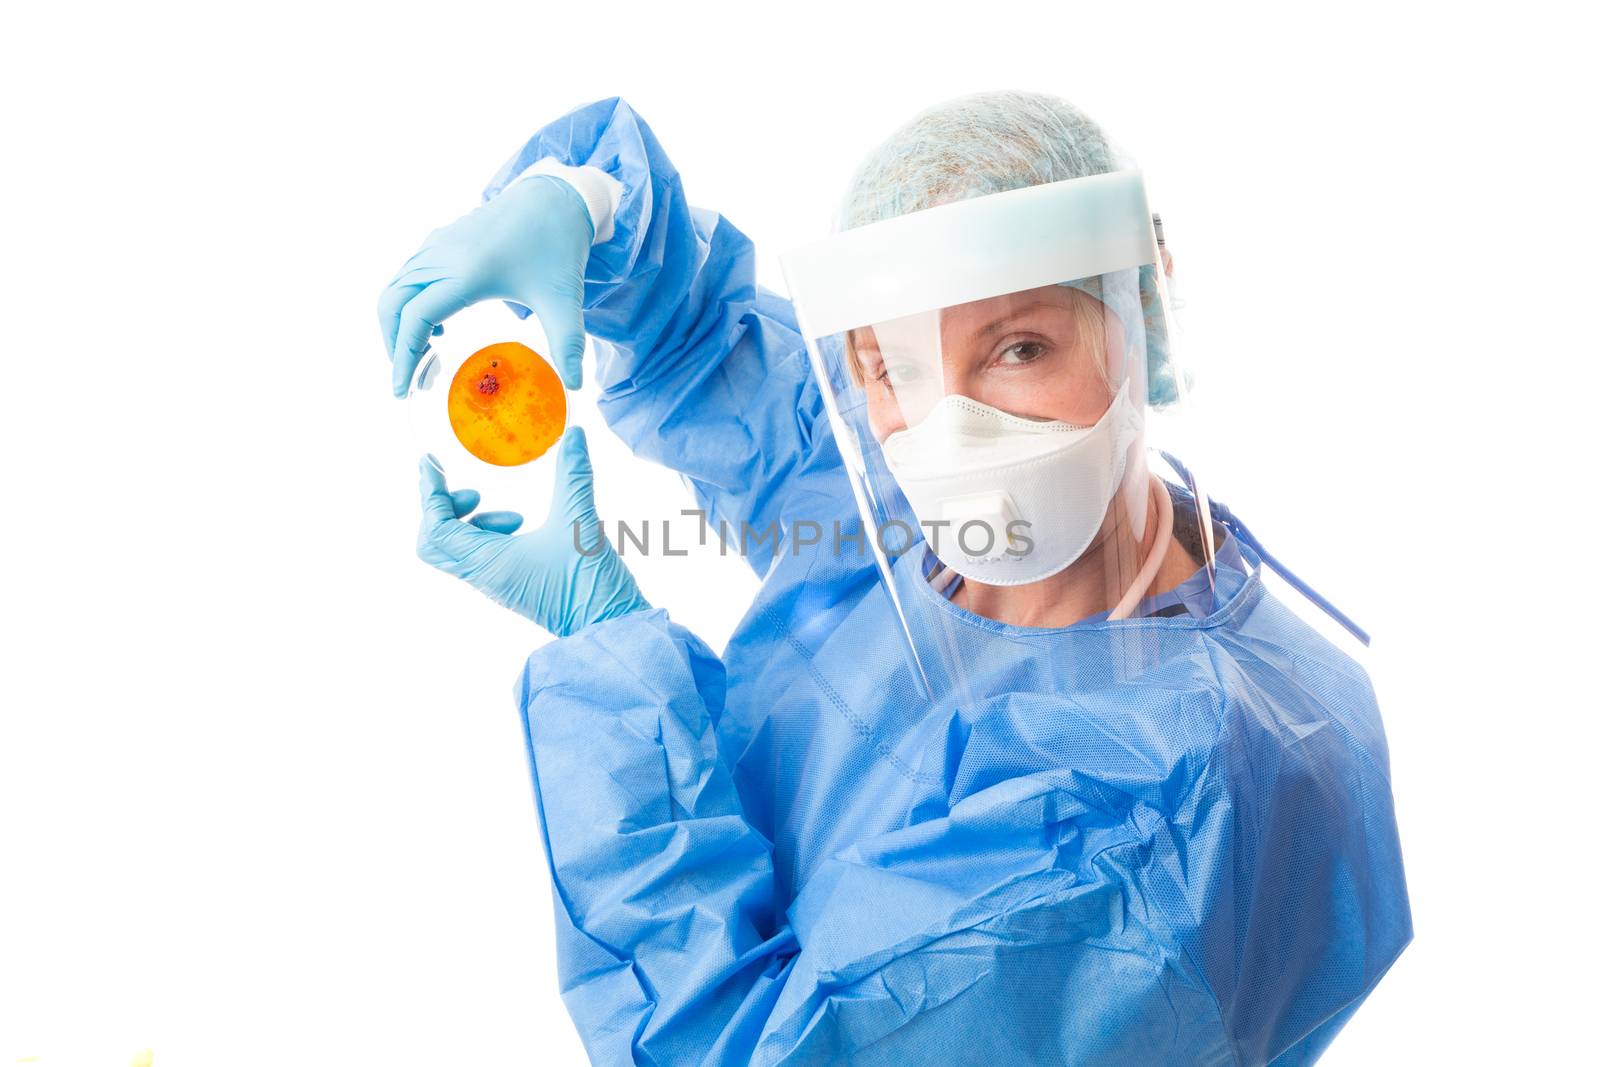 Pathology sceintist in biosecurity suit and PPE holds up a petri dish by lovleah